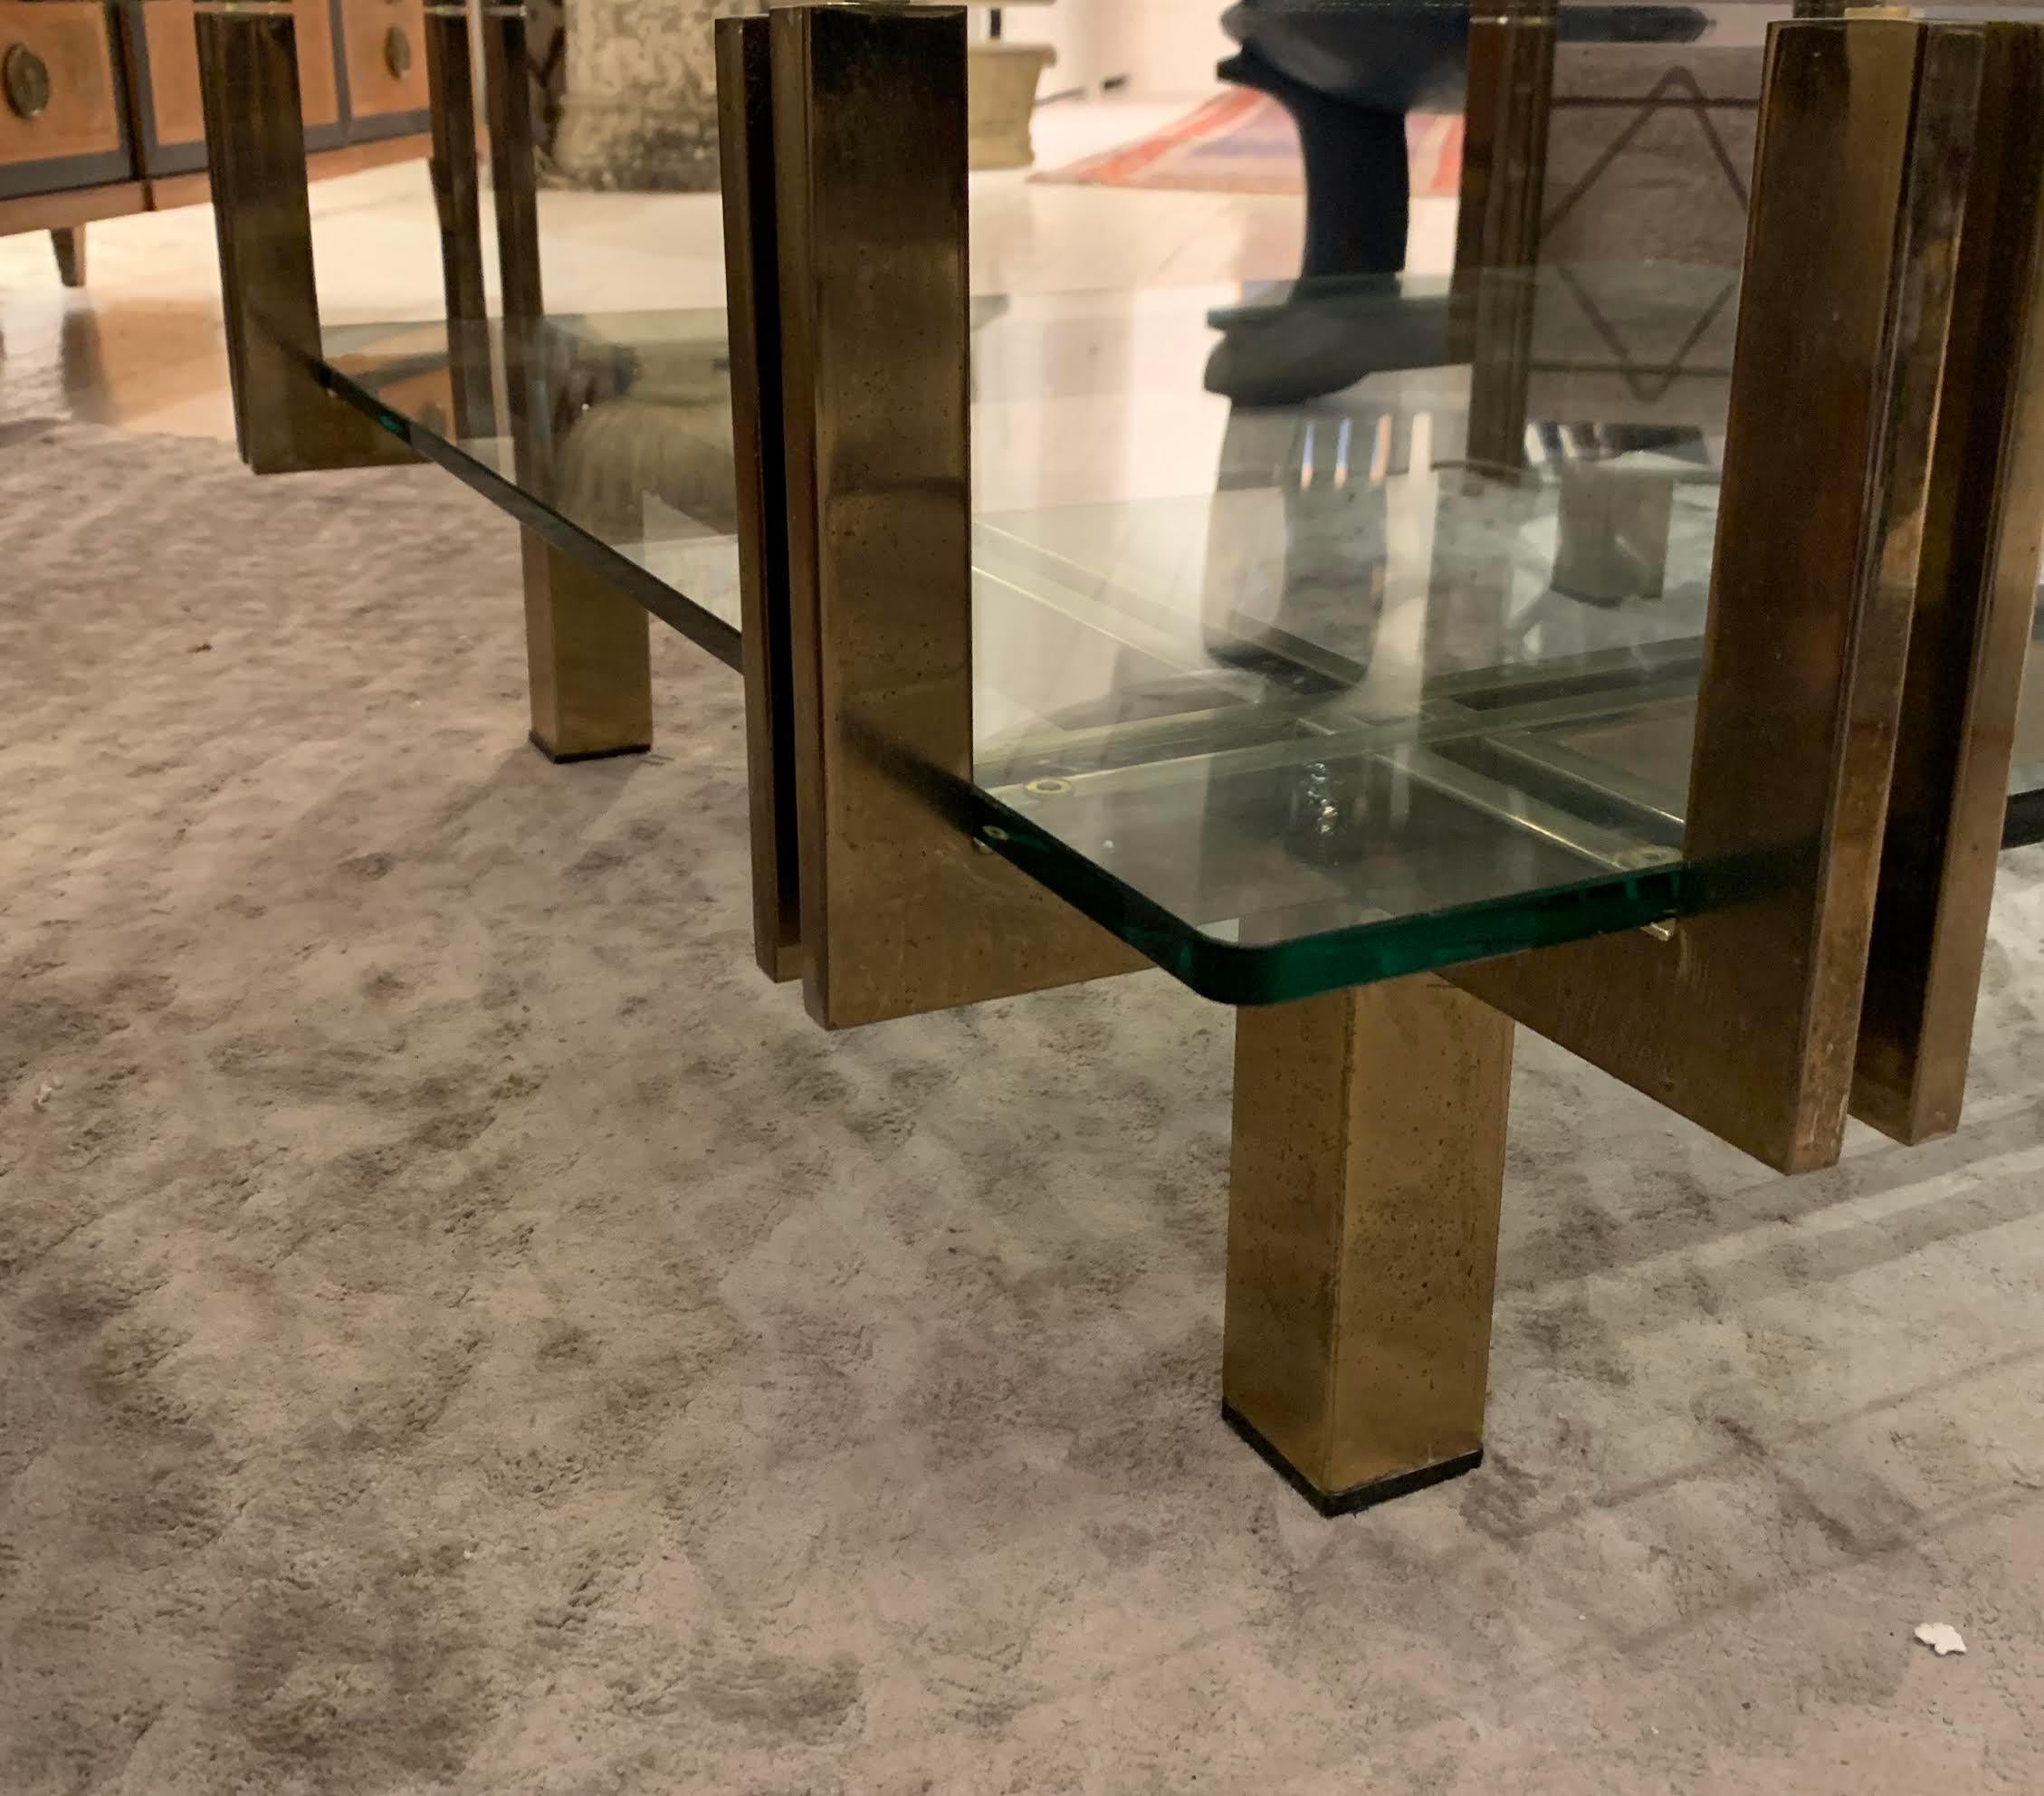 Midcentury Italian two-tier glass coffee table with polished nickel base.
Top tier extends past lower tier.
Glass top has minor scratches due to age and use.
 